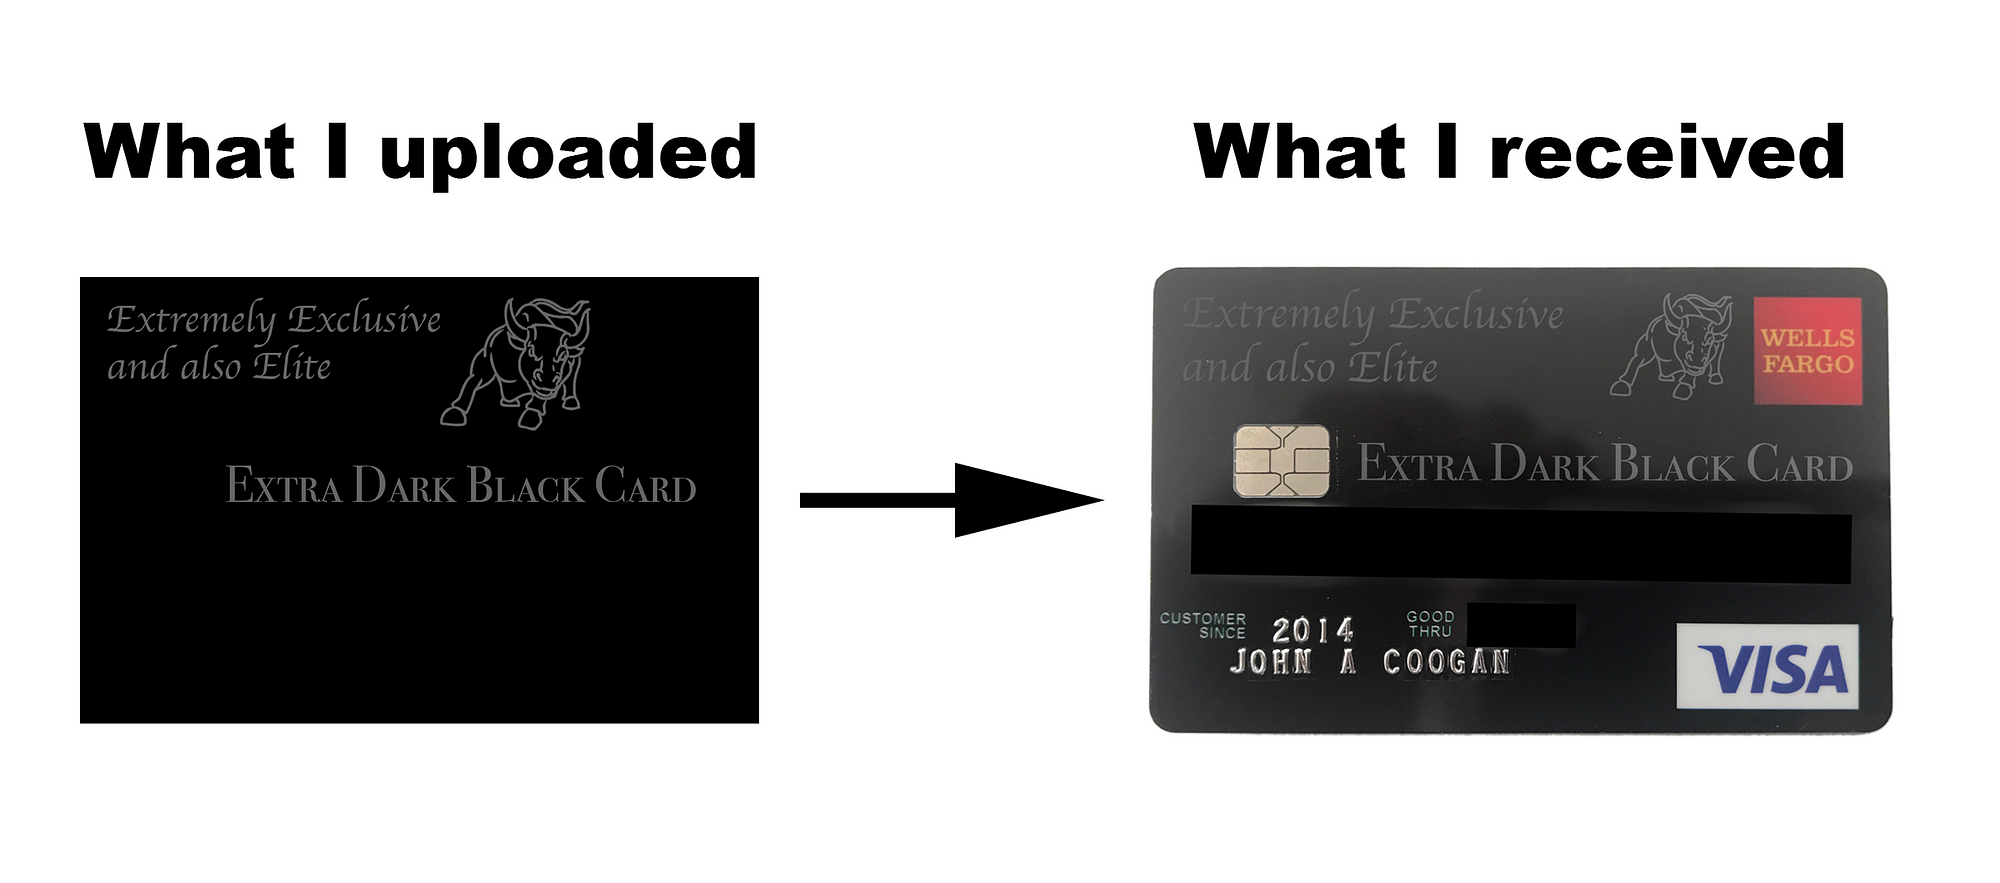 Best Credit Card Ever: The Extra Dark Black Card, by John Coogan